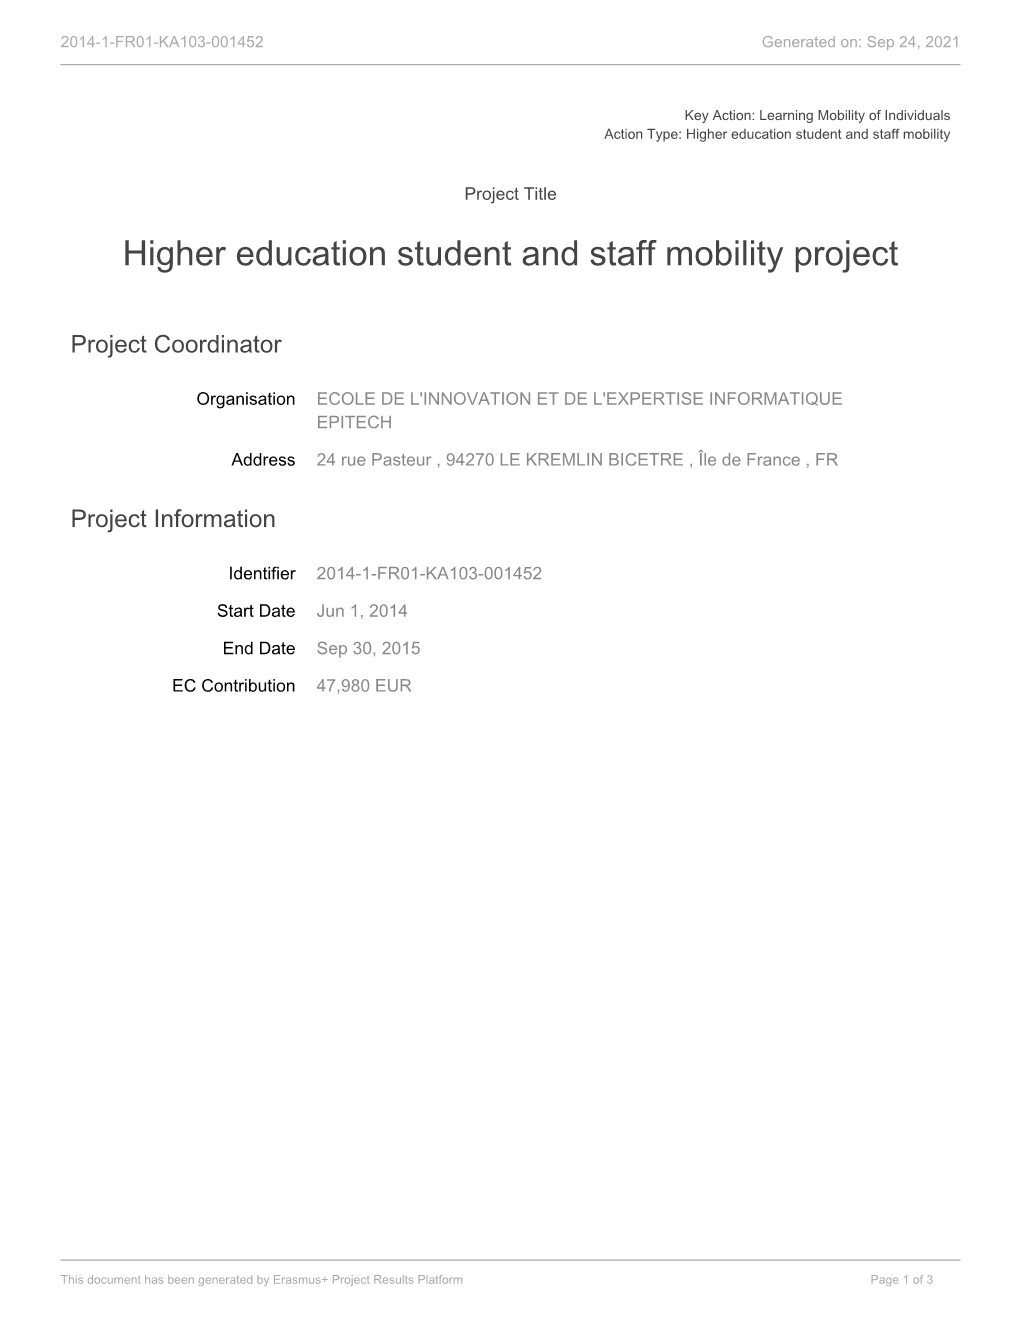 Higher Education Student and Staff Mobility Project